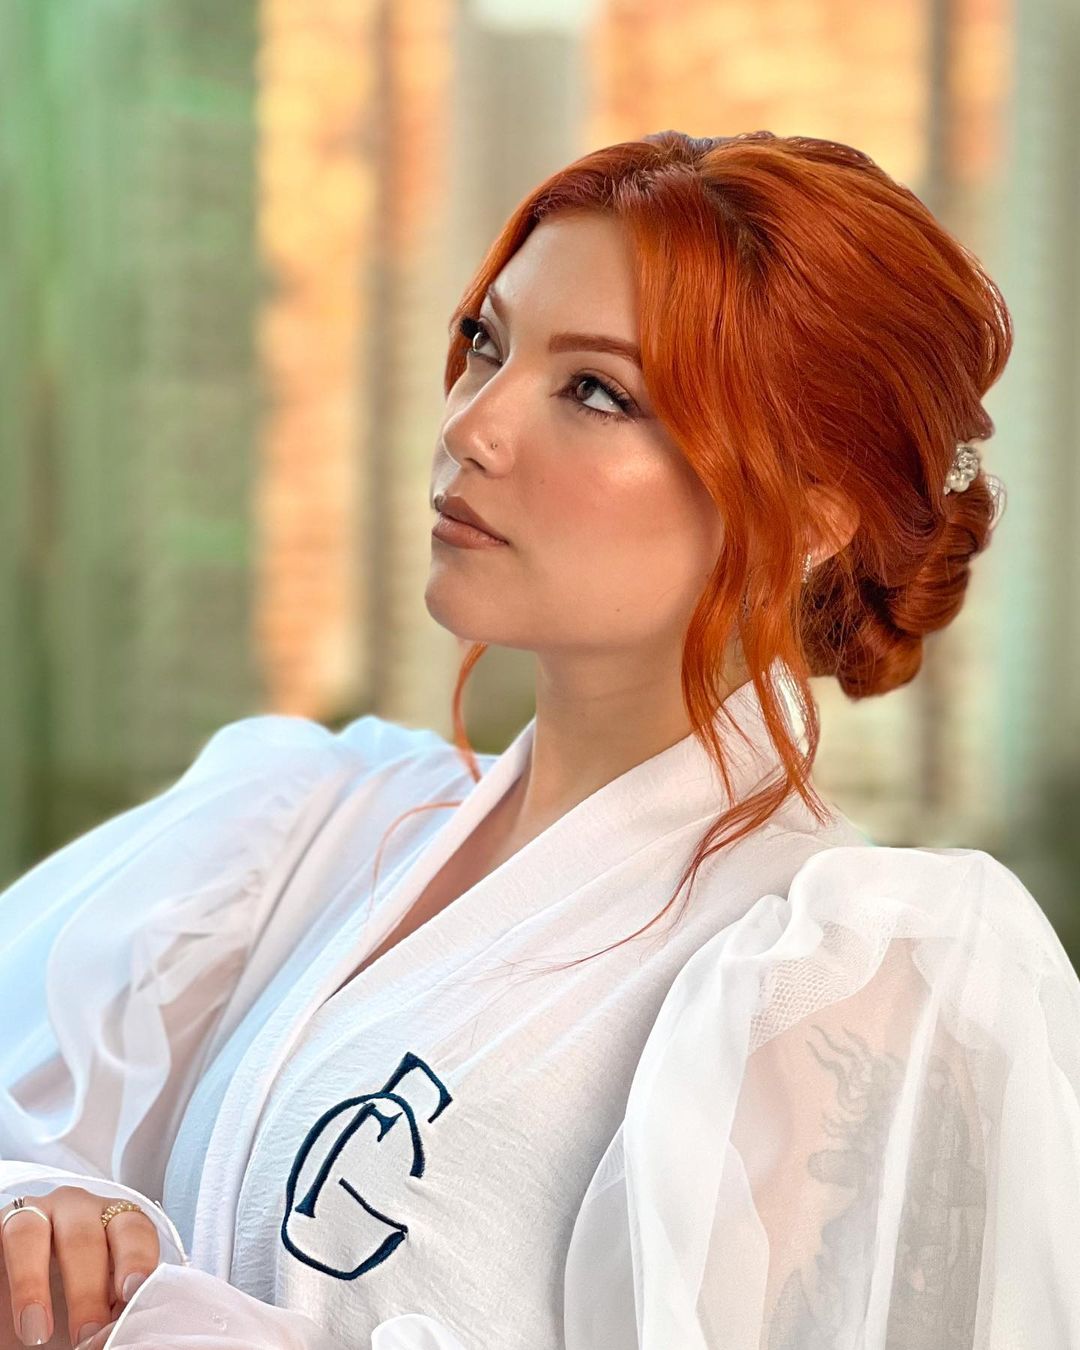 A person with red hair styled in an elegant updo, wearing a sheer white robe with monogrammed initials.